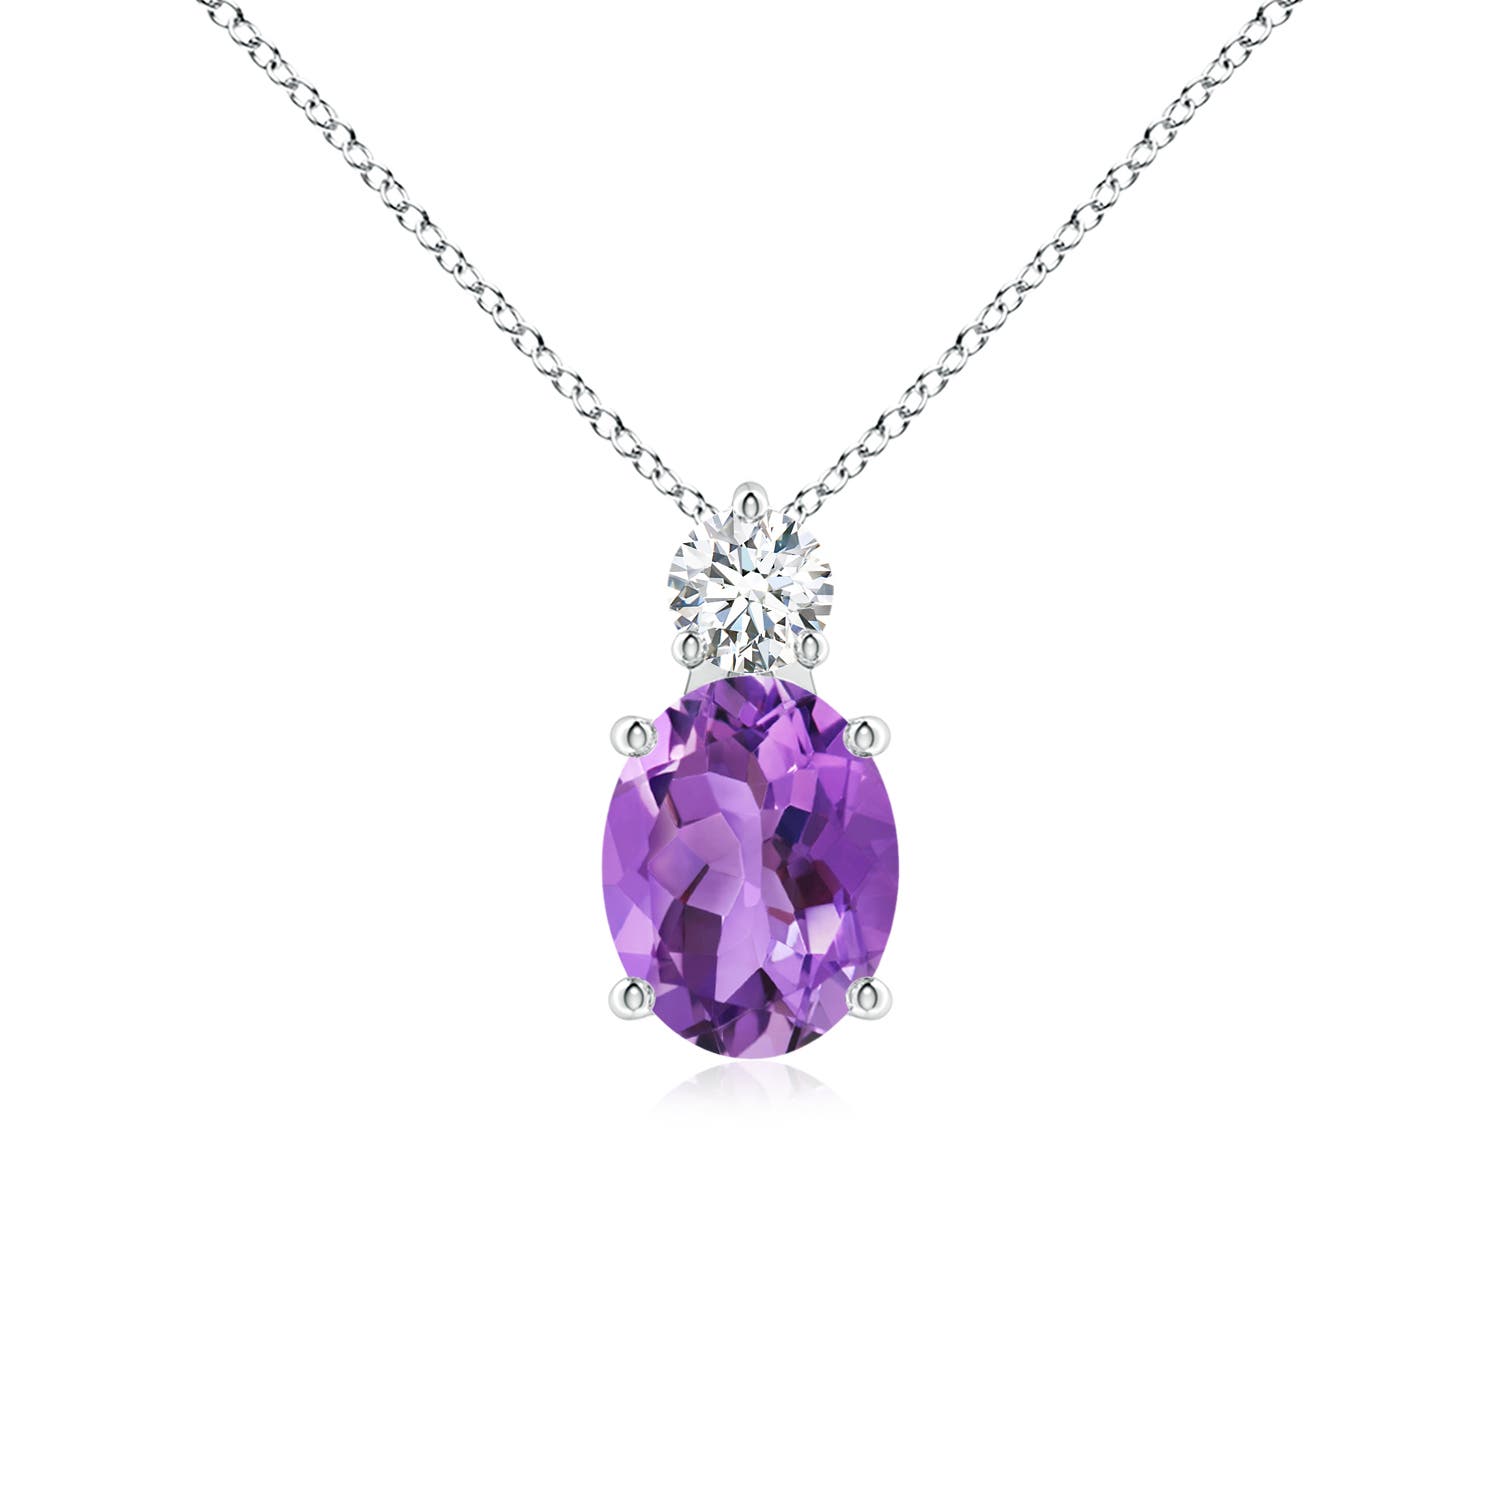 AA - Amethyst / 1.83 CT / 14 KT White Gold